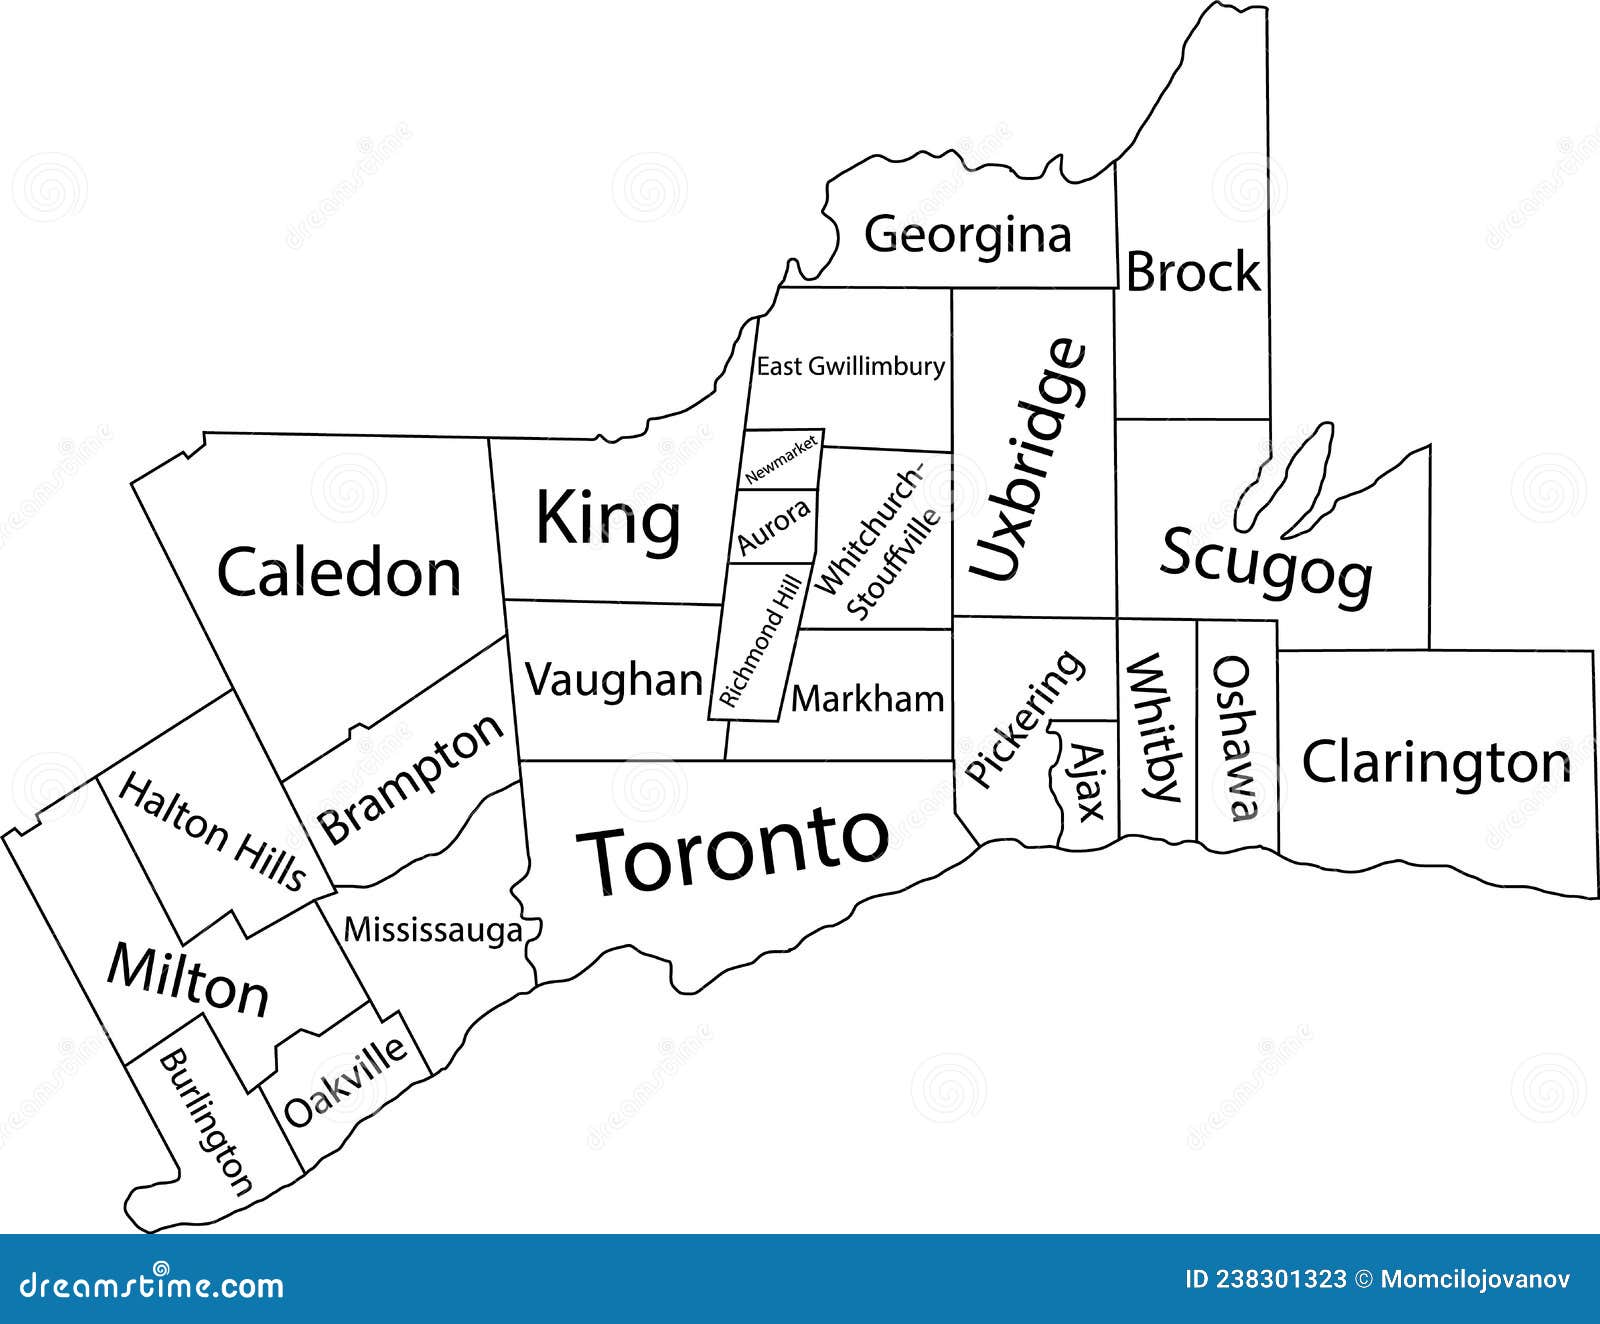 white tagged map of municipalities of greater toronto area, ontario, canada